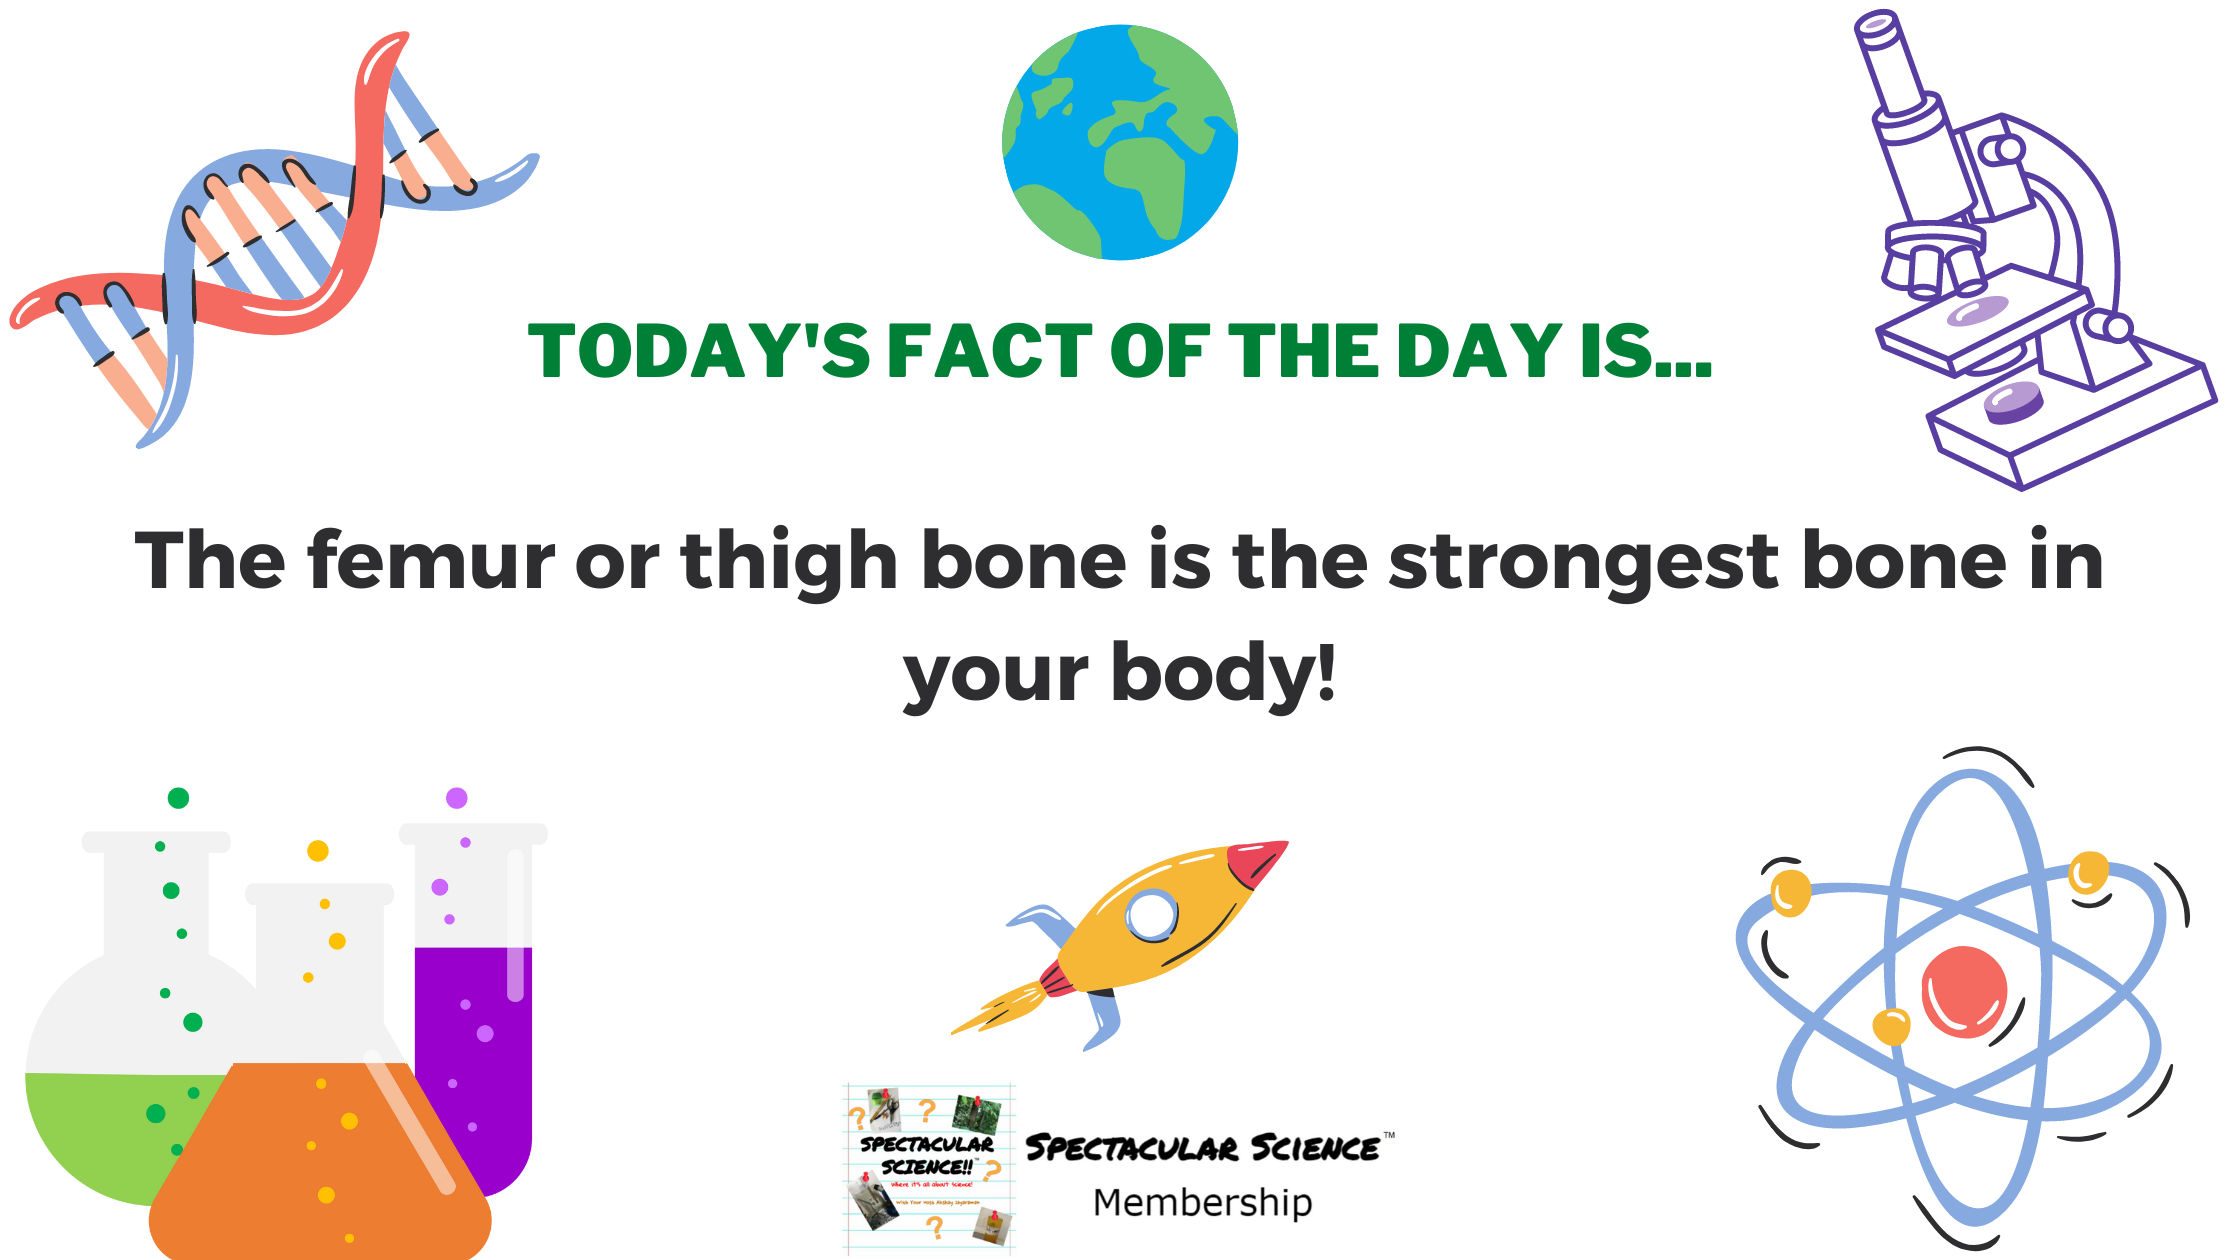 Fact of the Day Image Apr. 23rd